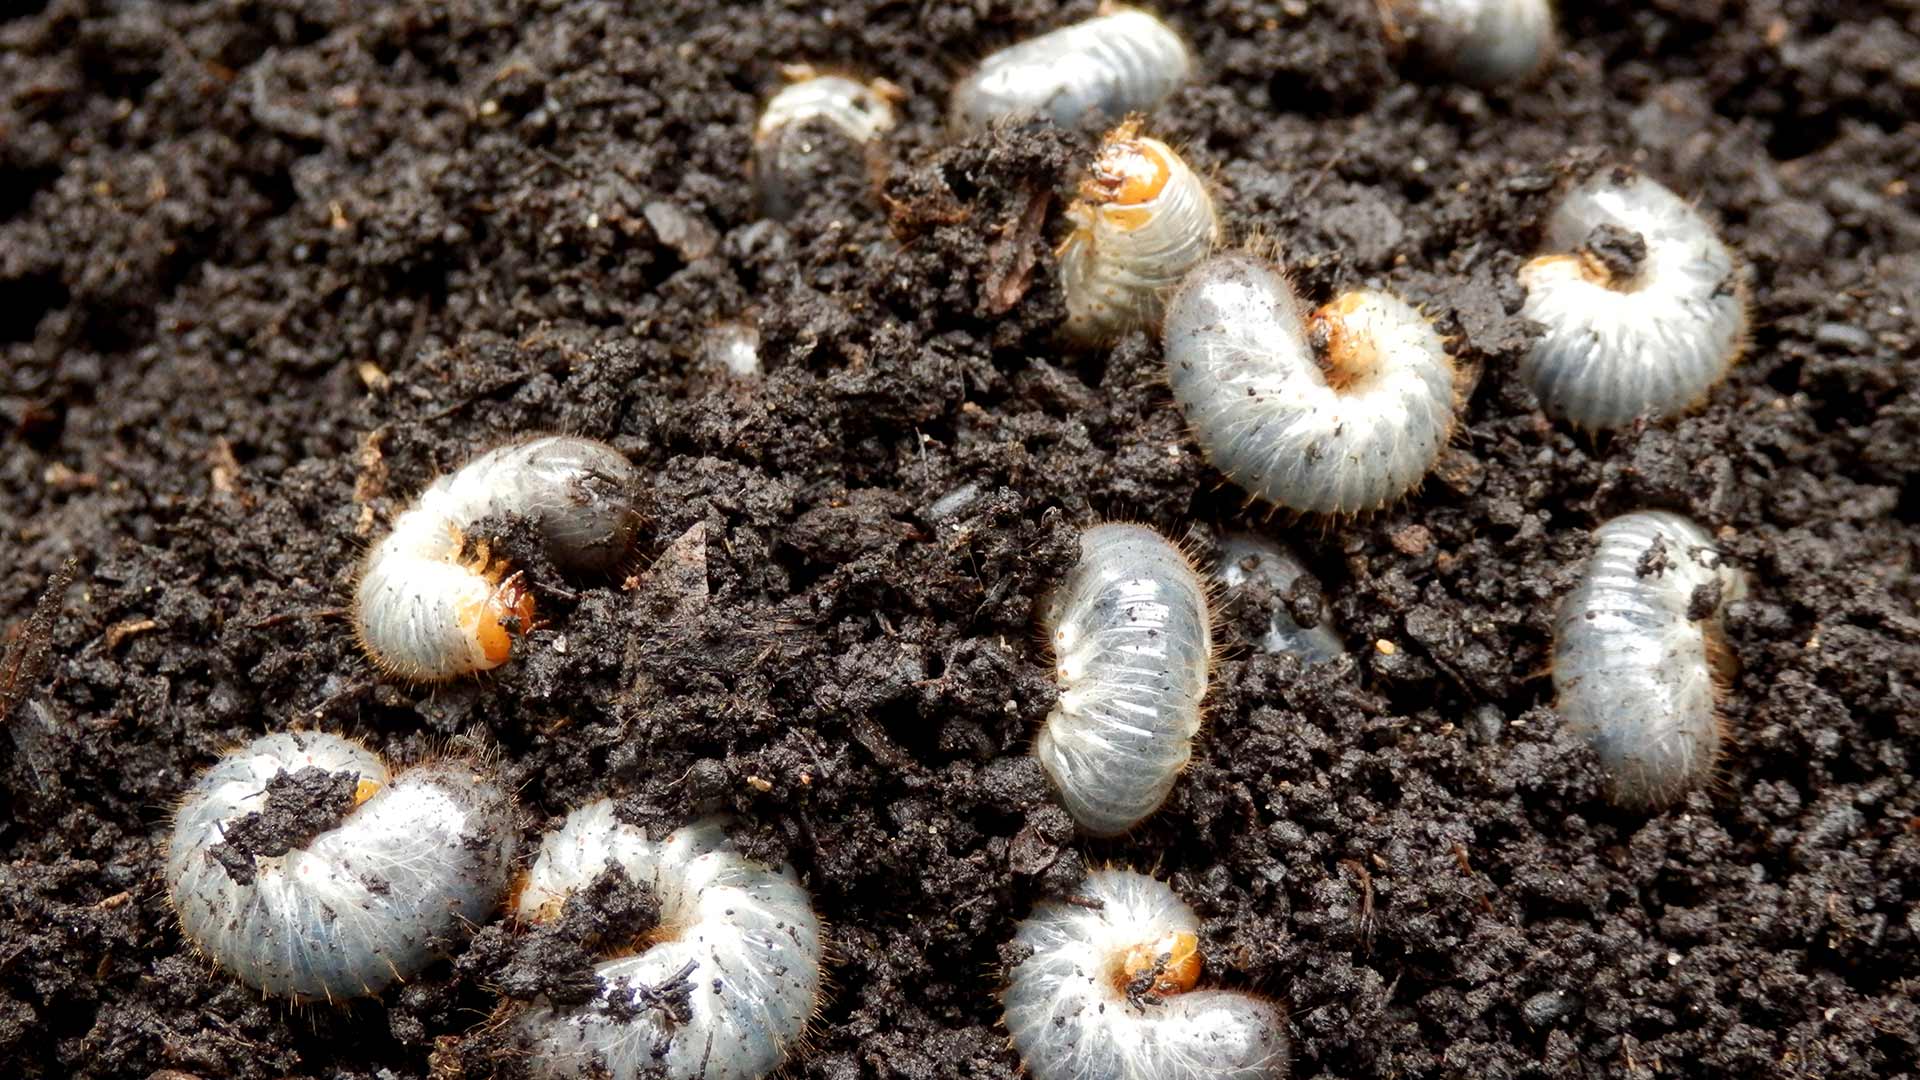 Lawn grubs clustered in soil near Mansfield, OH.